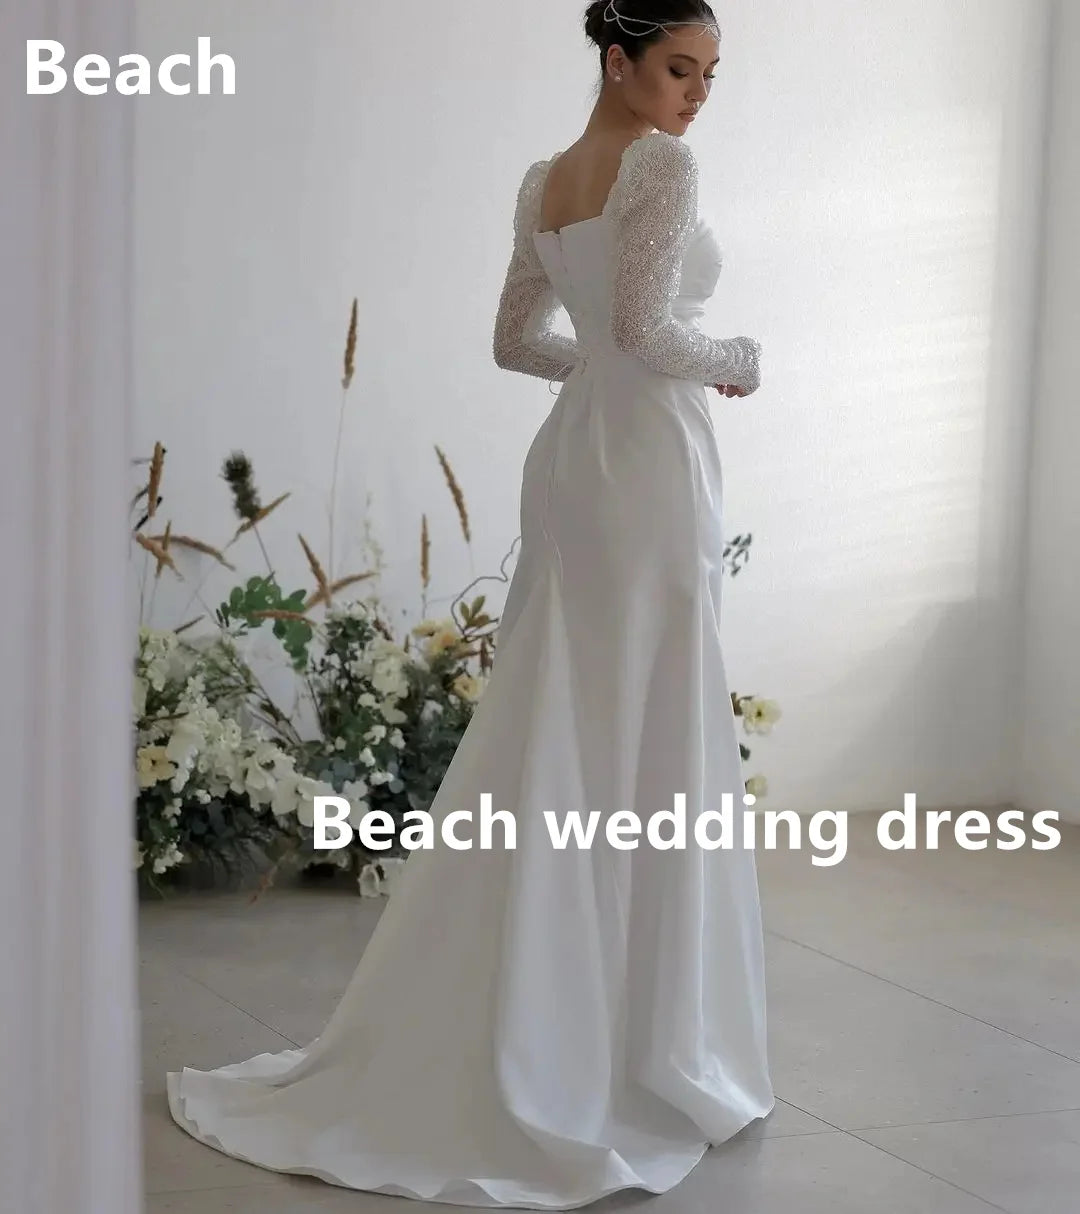 Bohemian Nermaid Wedding Dresses Lace Long Sleeves Sweetheart Formal Pricness Bride Bridal Gown Party Evening Dress